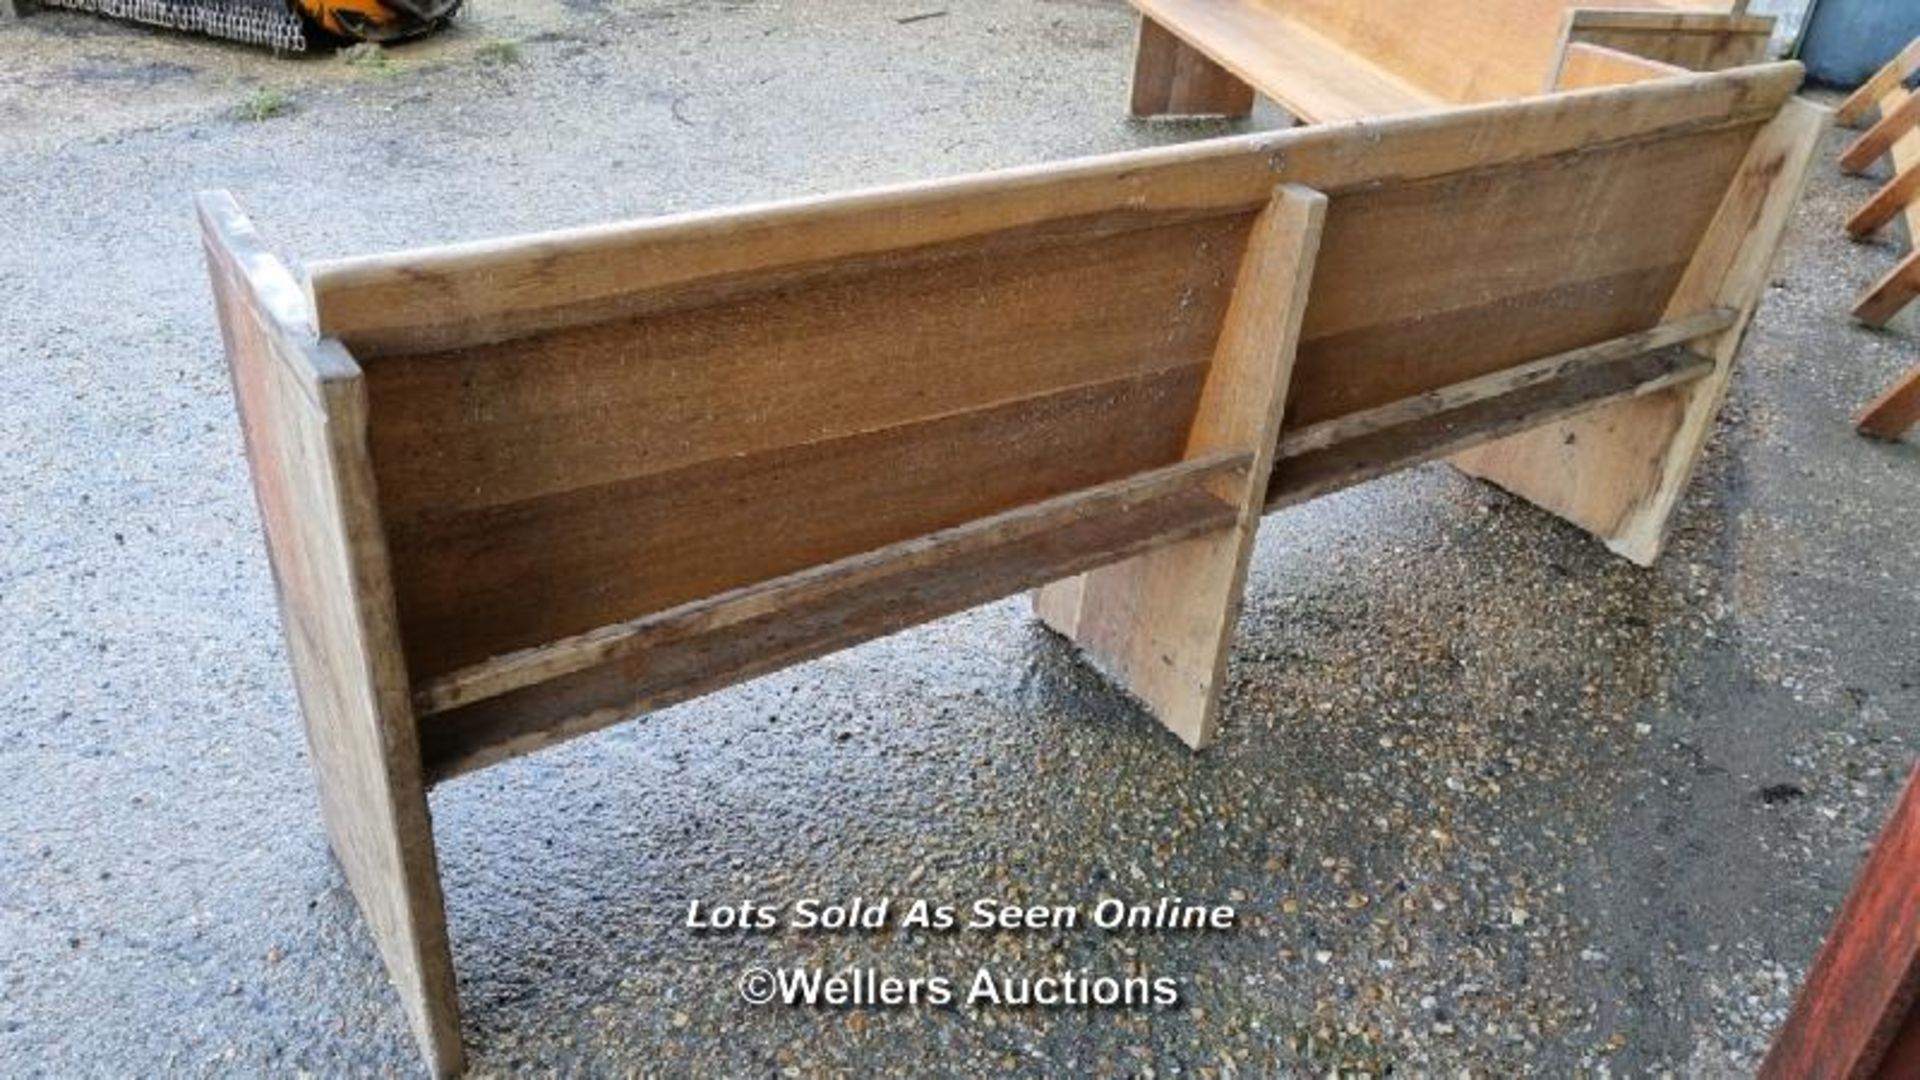 A pair of oak pews. 213cm long, 85cm high and 52cm deep. The seat depth is 36cm so very confortable. - Image 5 of 7